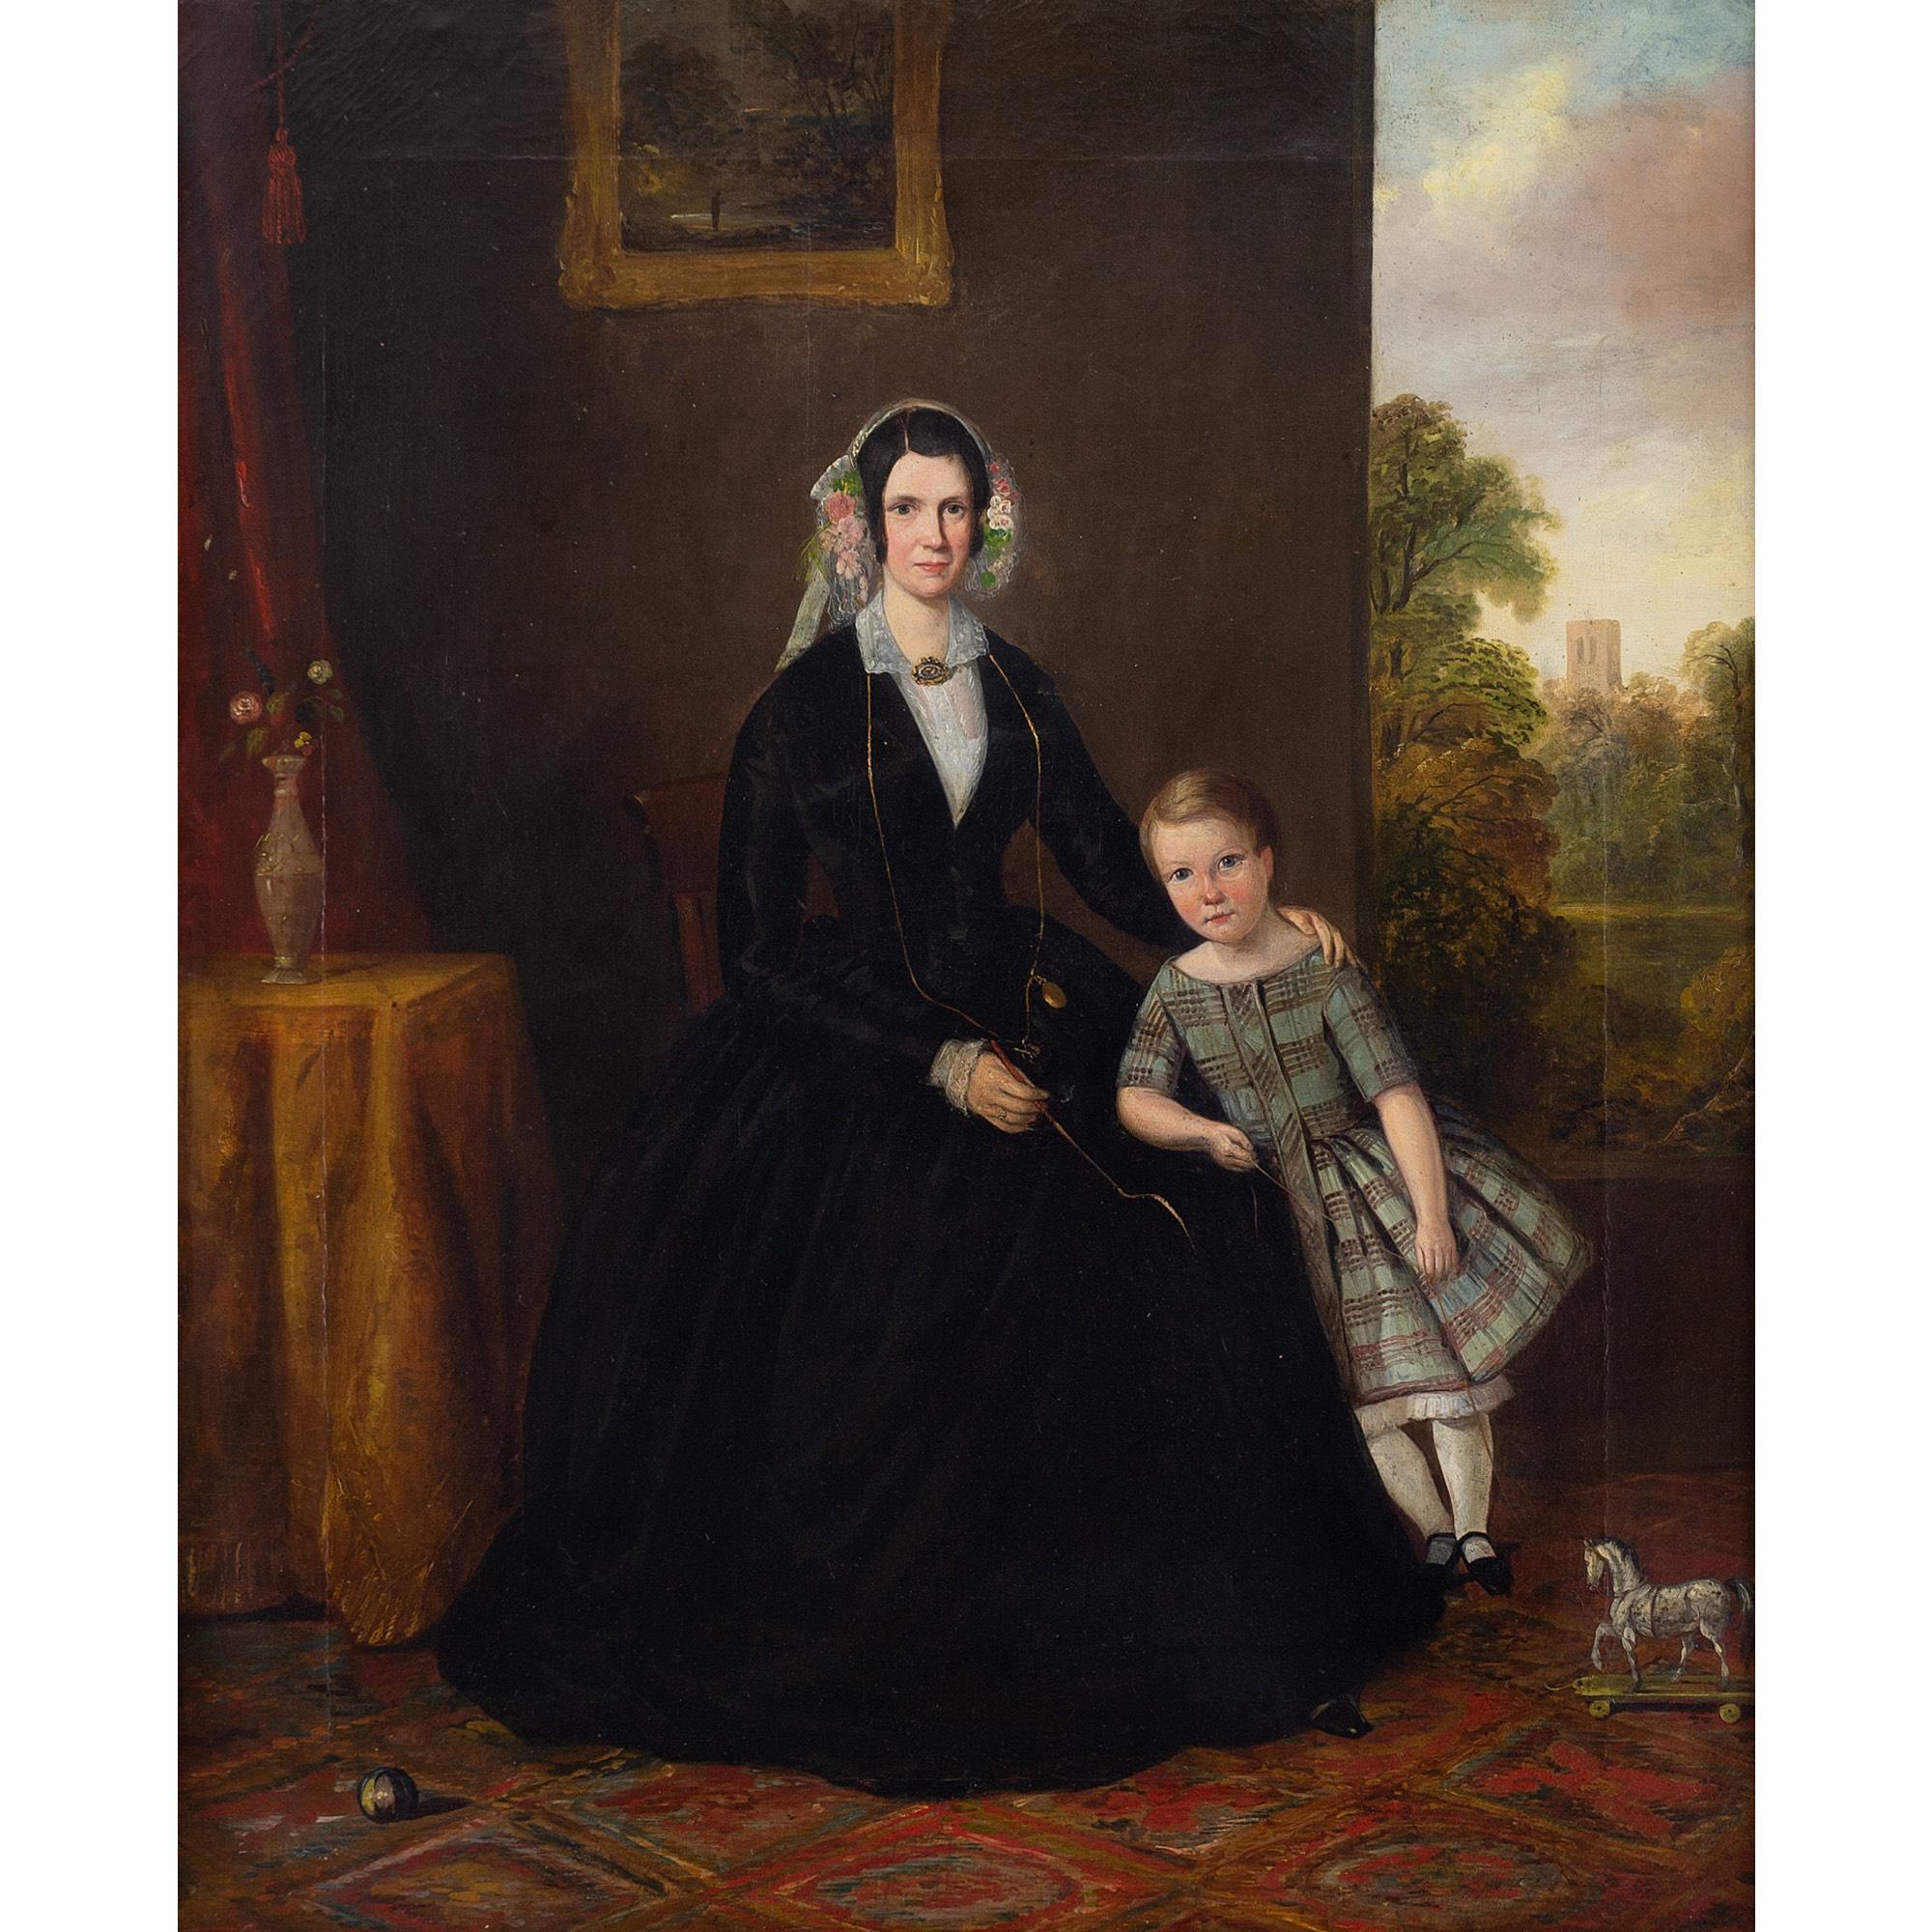 19th-Century Provincial British School Portrait Of A Mother & Child, Folk Art - Painting by Unknown